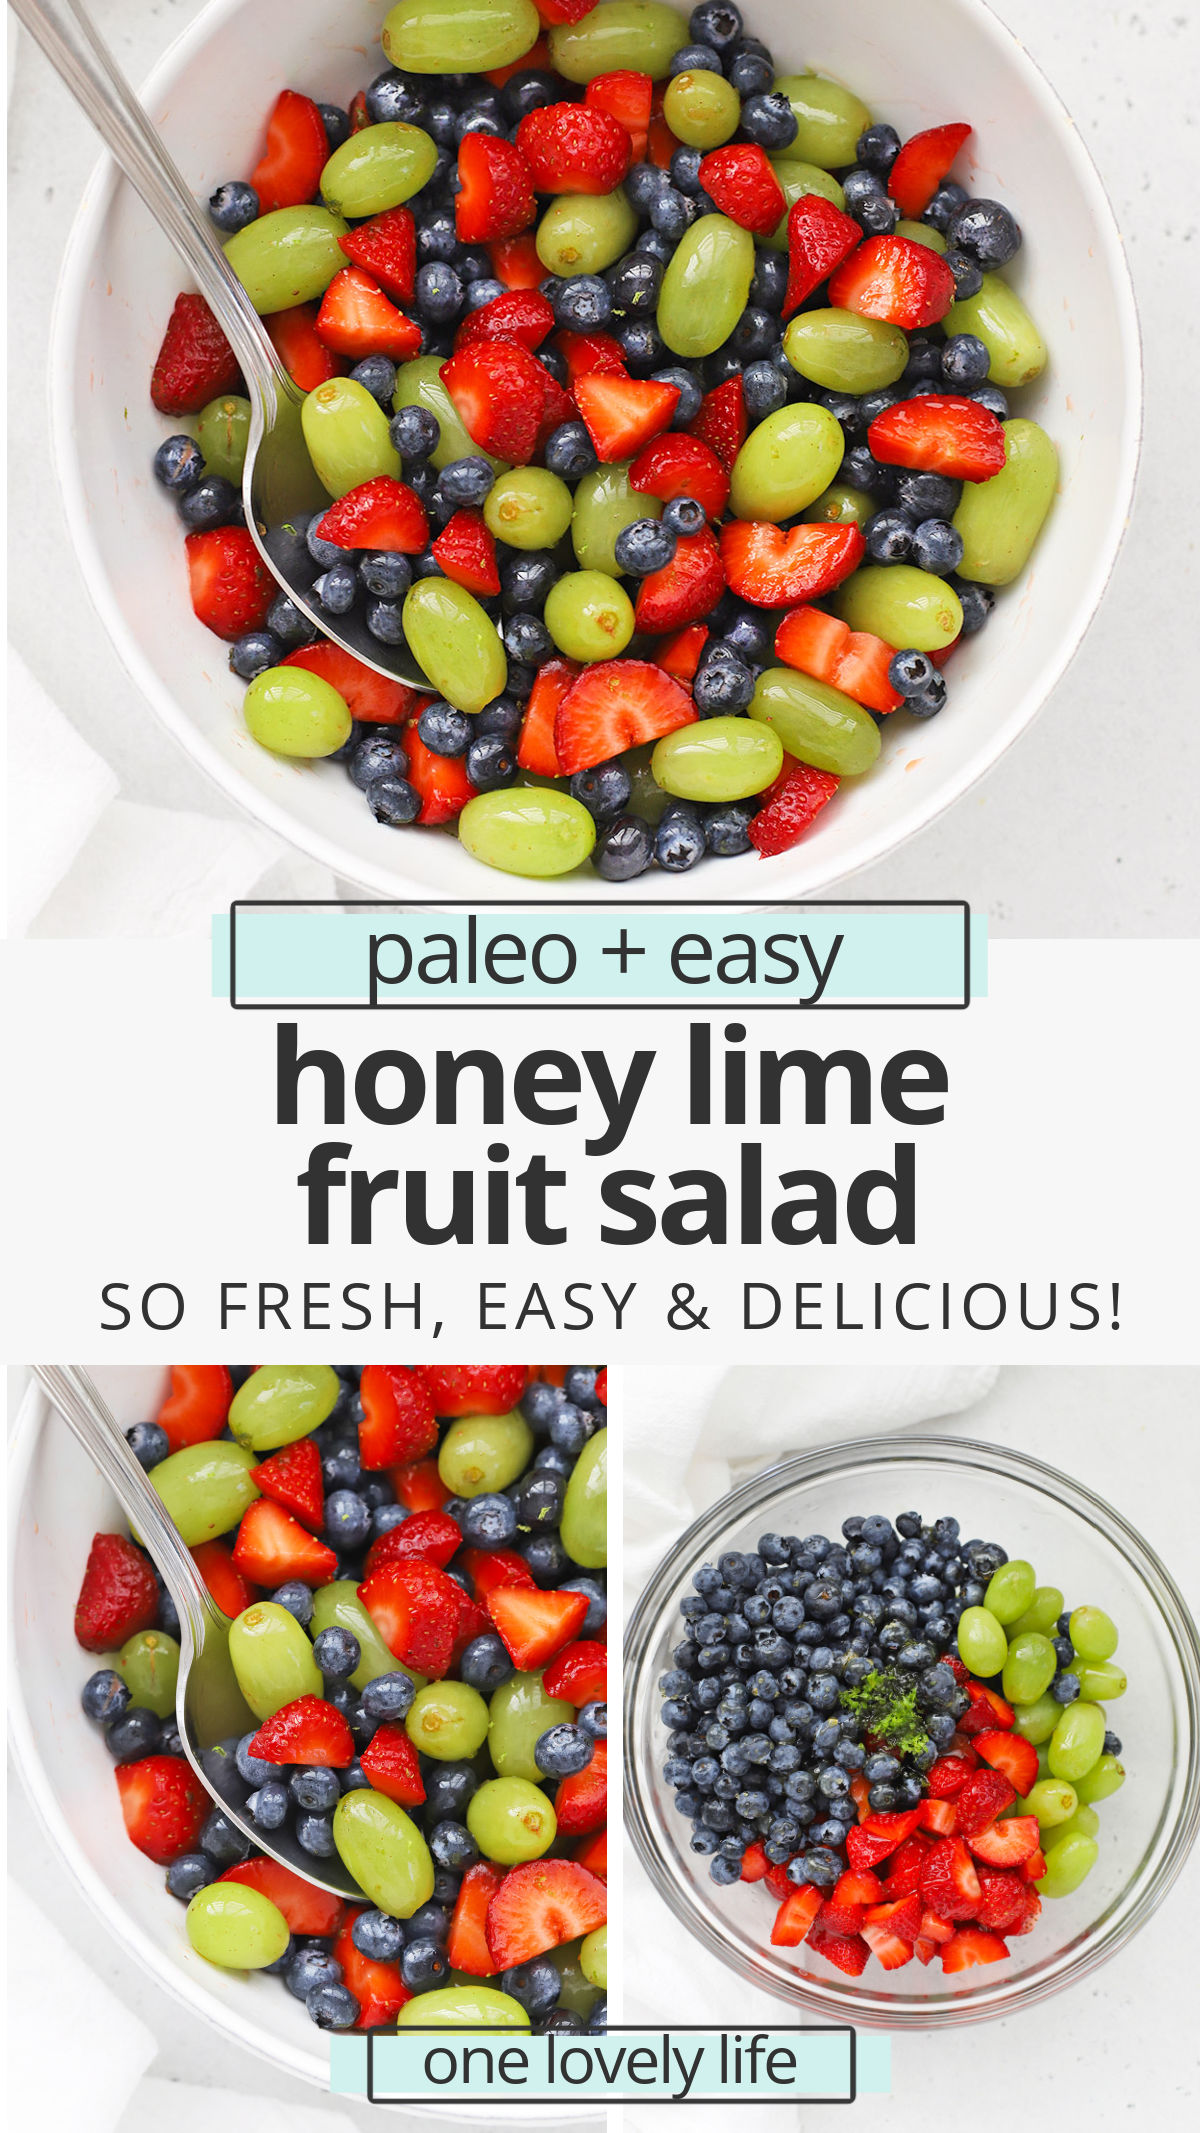 Honey Lime Fruit Salad is my favorite side dish. It's perfect for weeknight dinners, baby or wedding showers, barbecues, and more! // honey lime fruit salad recipe // healthy fruit salad // paleo fruit salad // fruit salad recipe // honey lime dressing #fruitsalad #honeylime #potluck #picnic #barbecue #sidedish #brunch #paleo